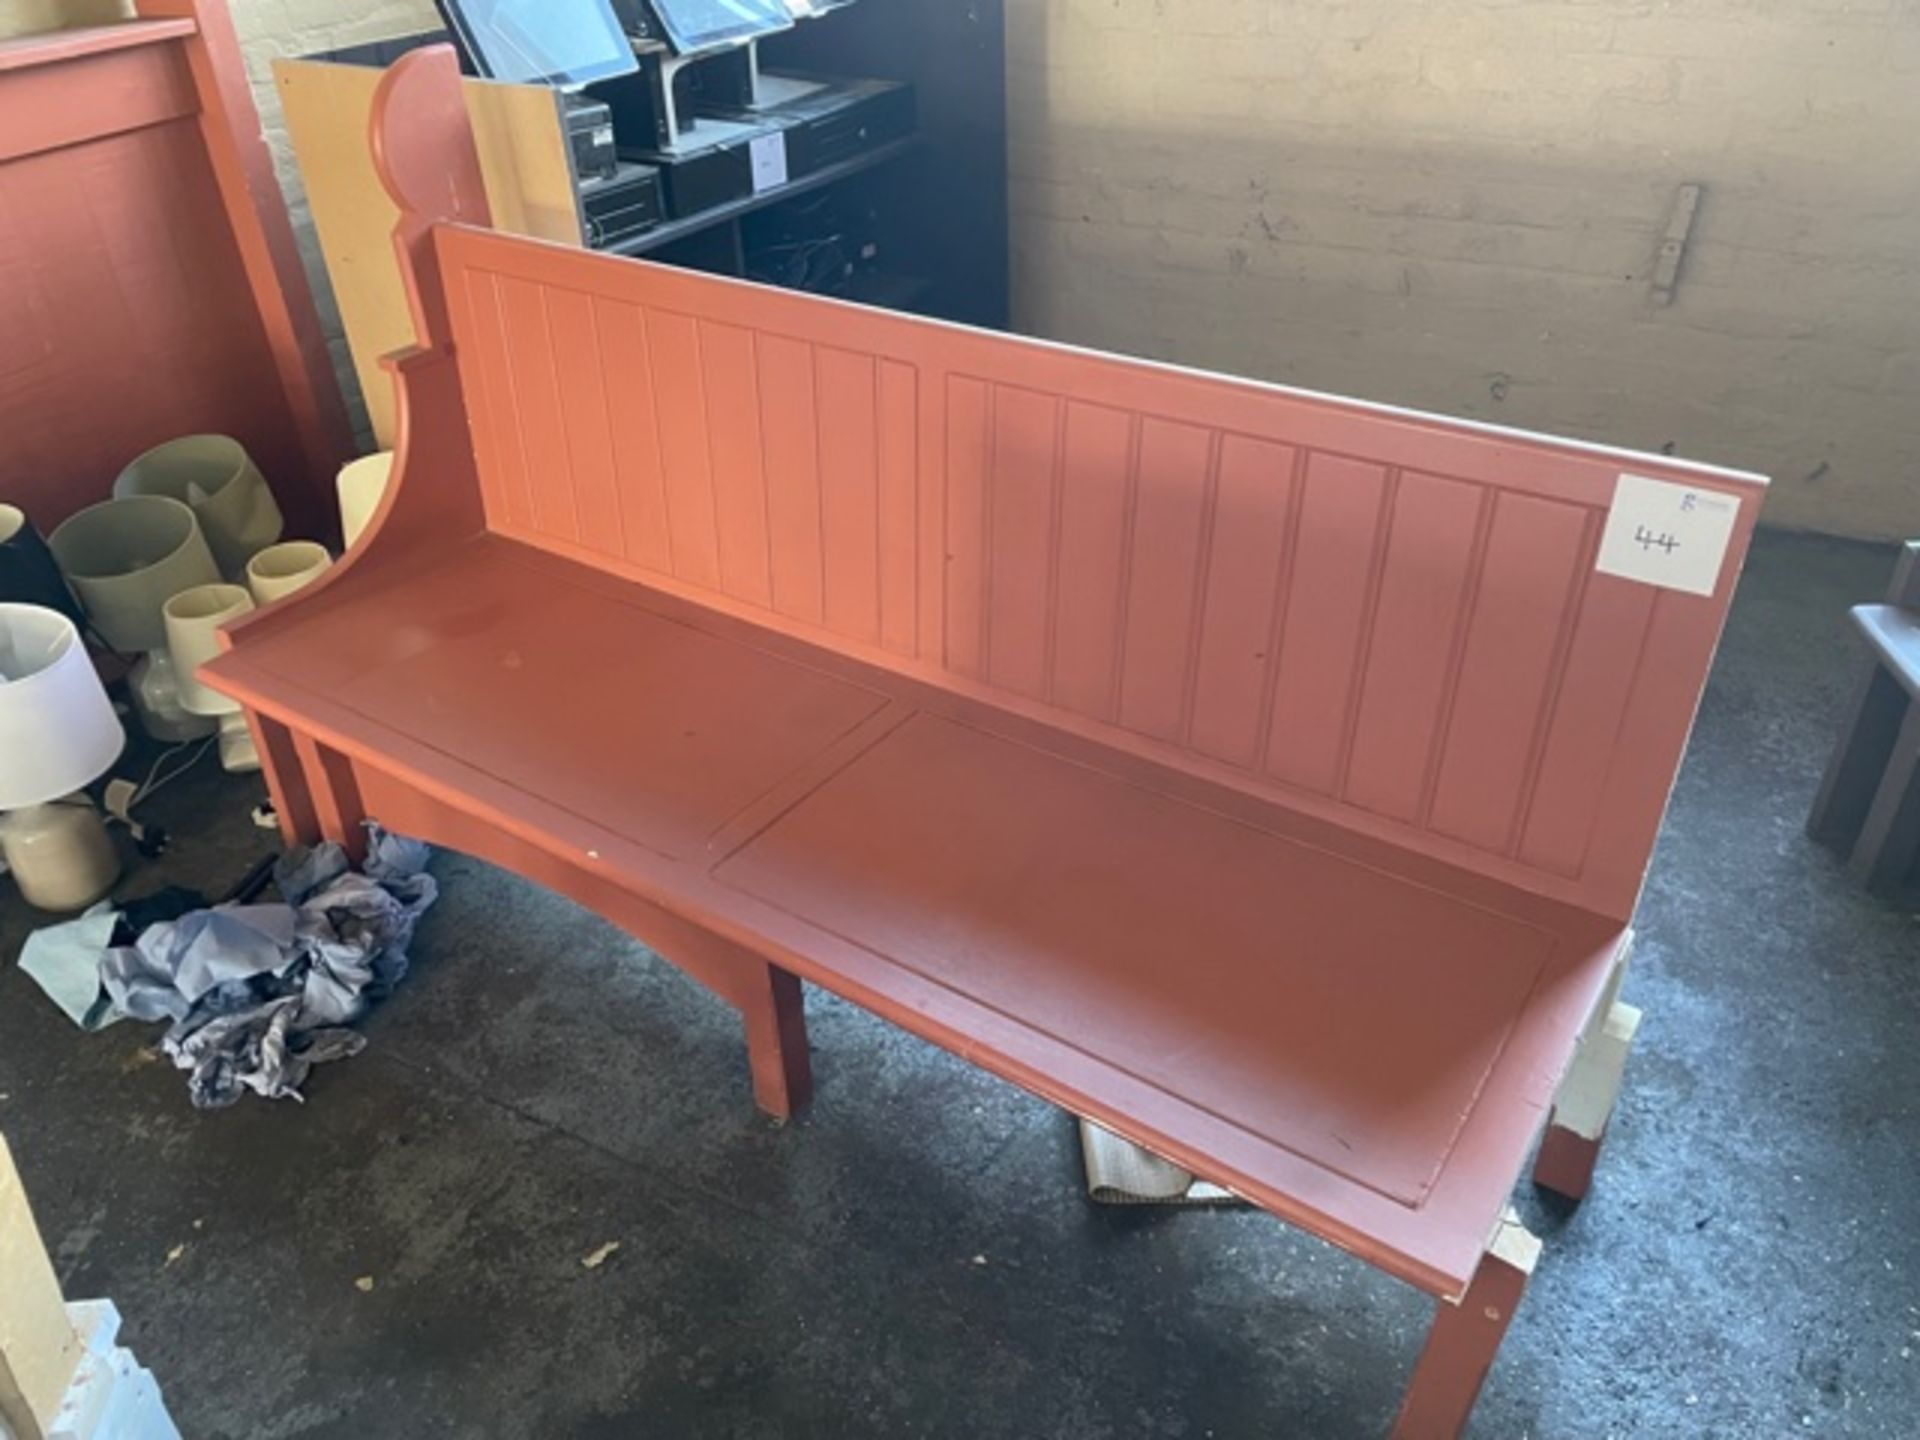 SALMON COLOURED PEW STYLED SEATING - approx 11 feet long - Image 2 of 2